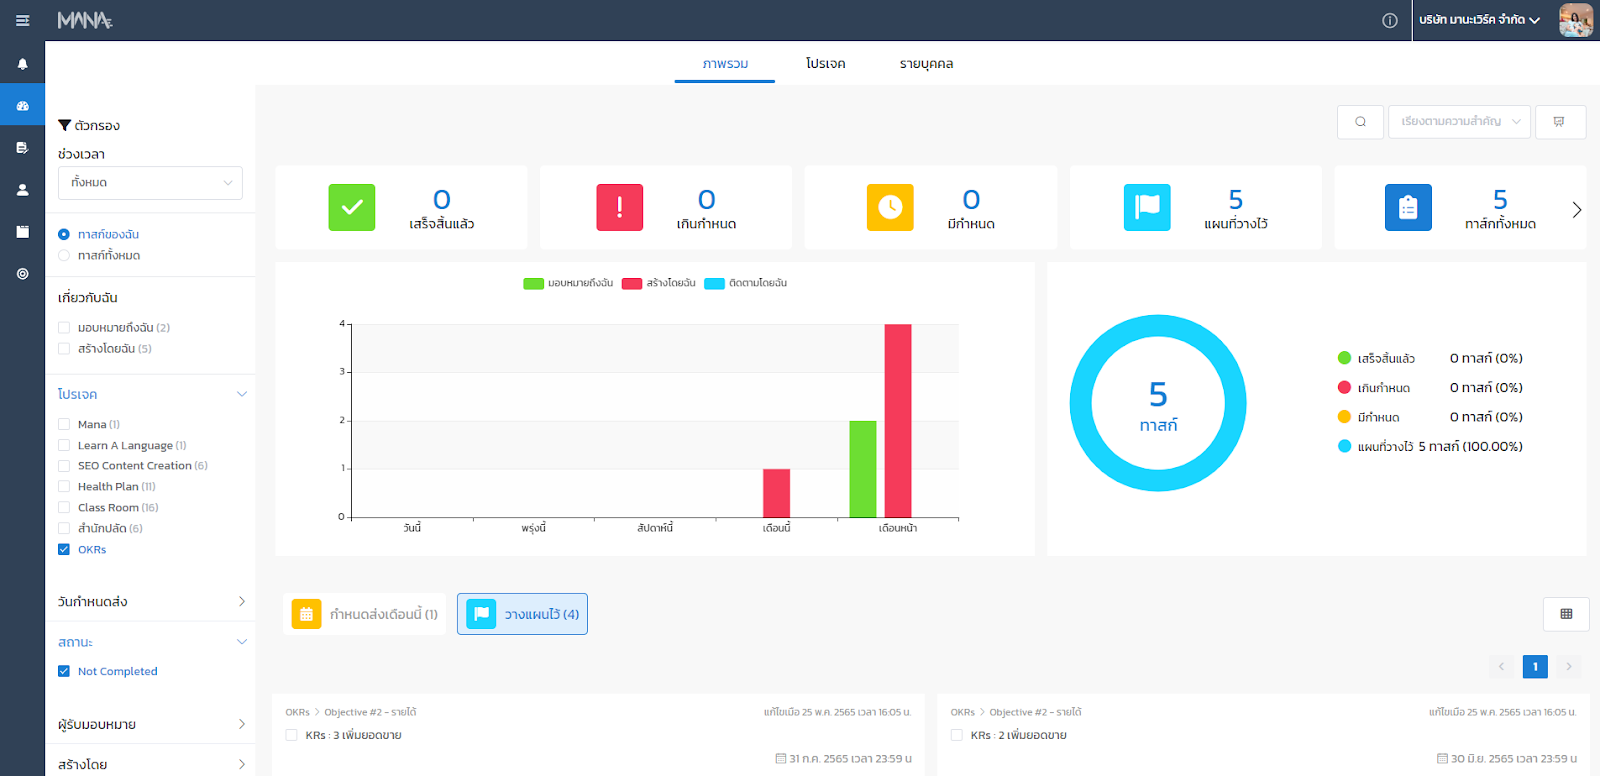 Project Management Tools - Dashboard